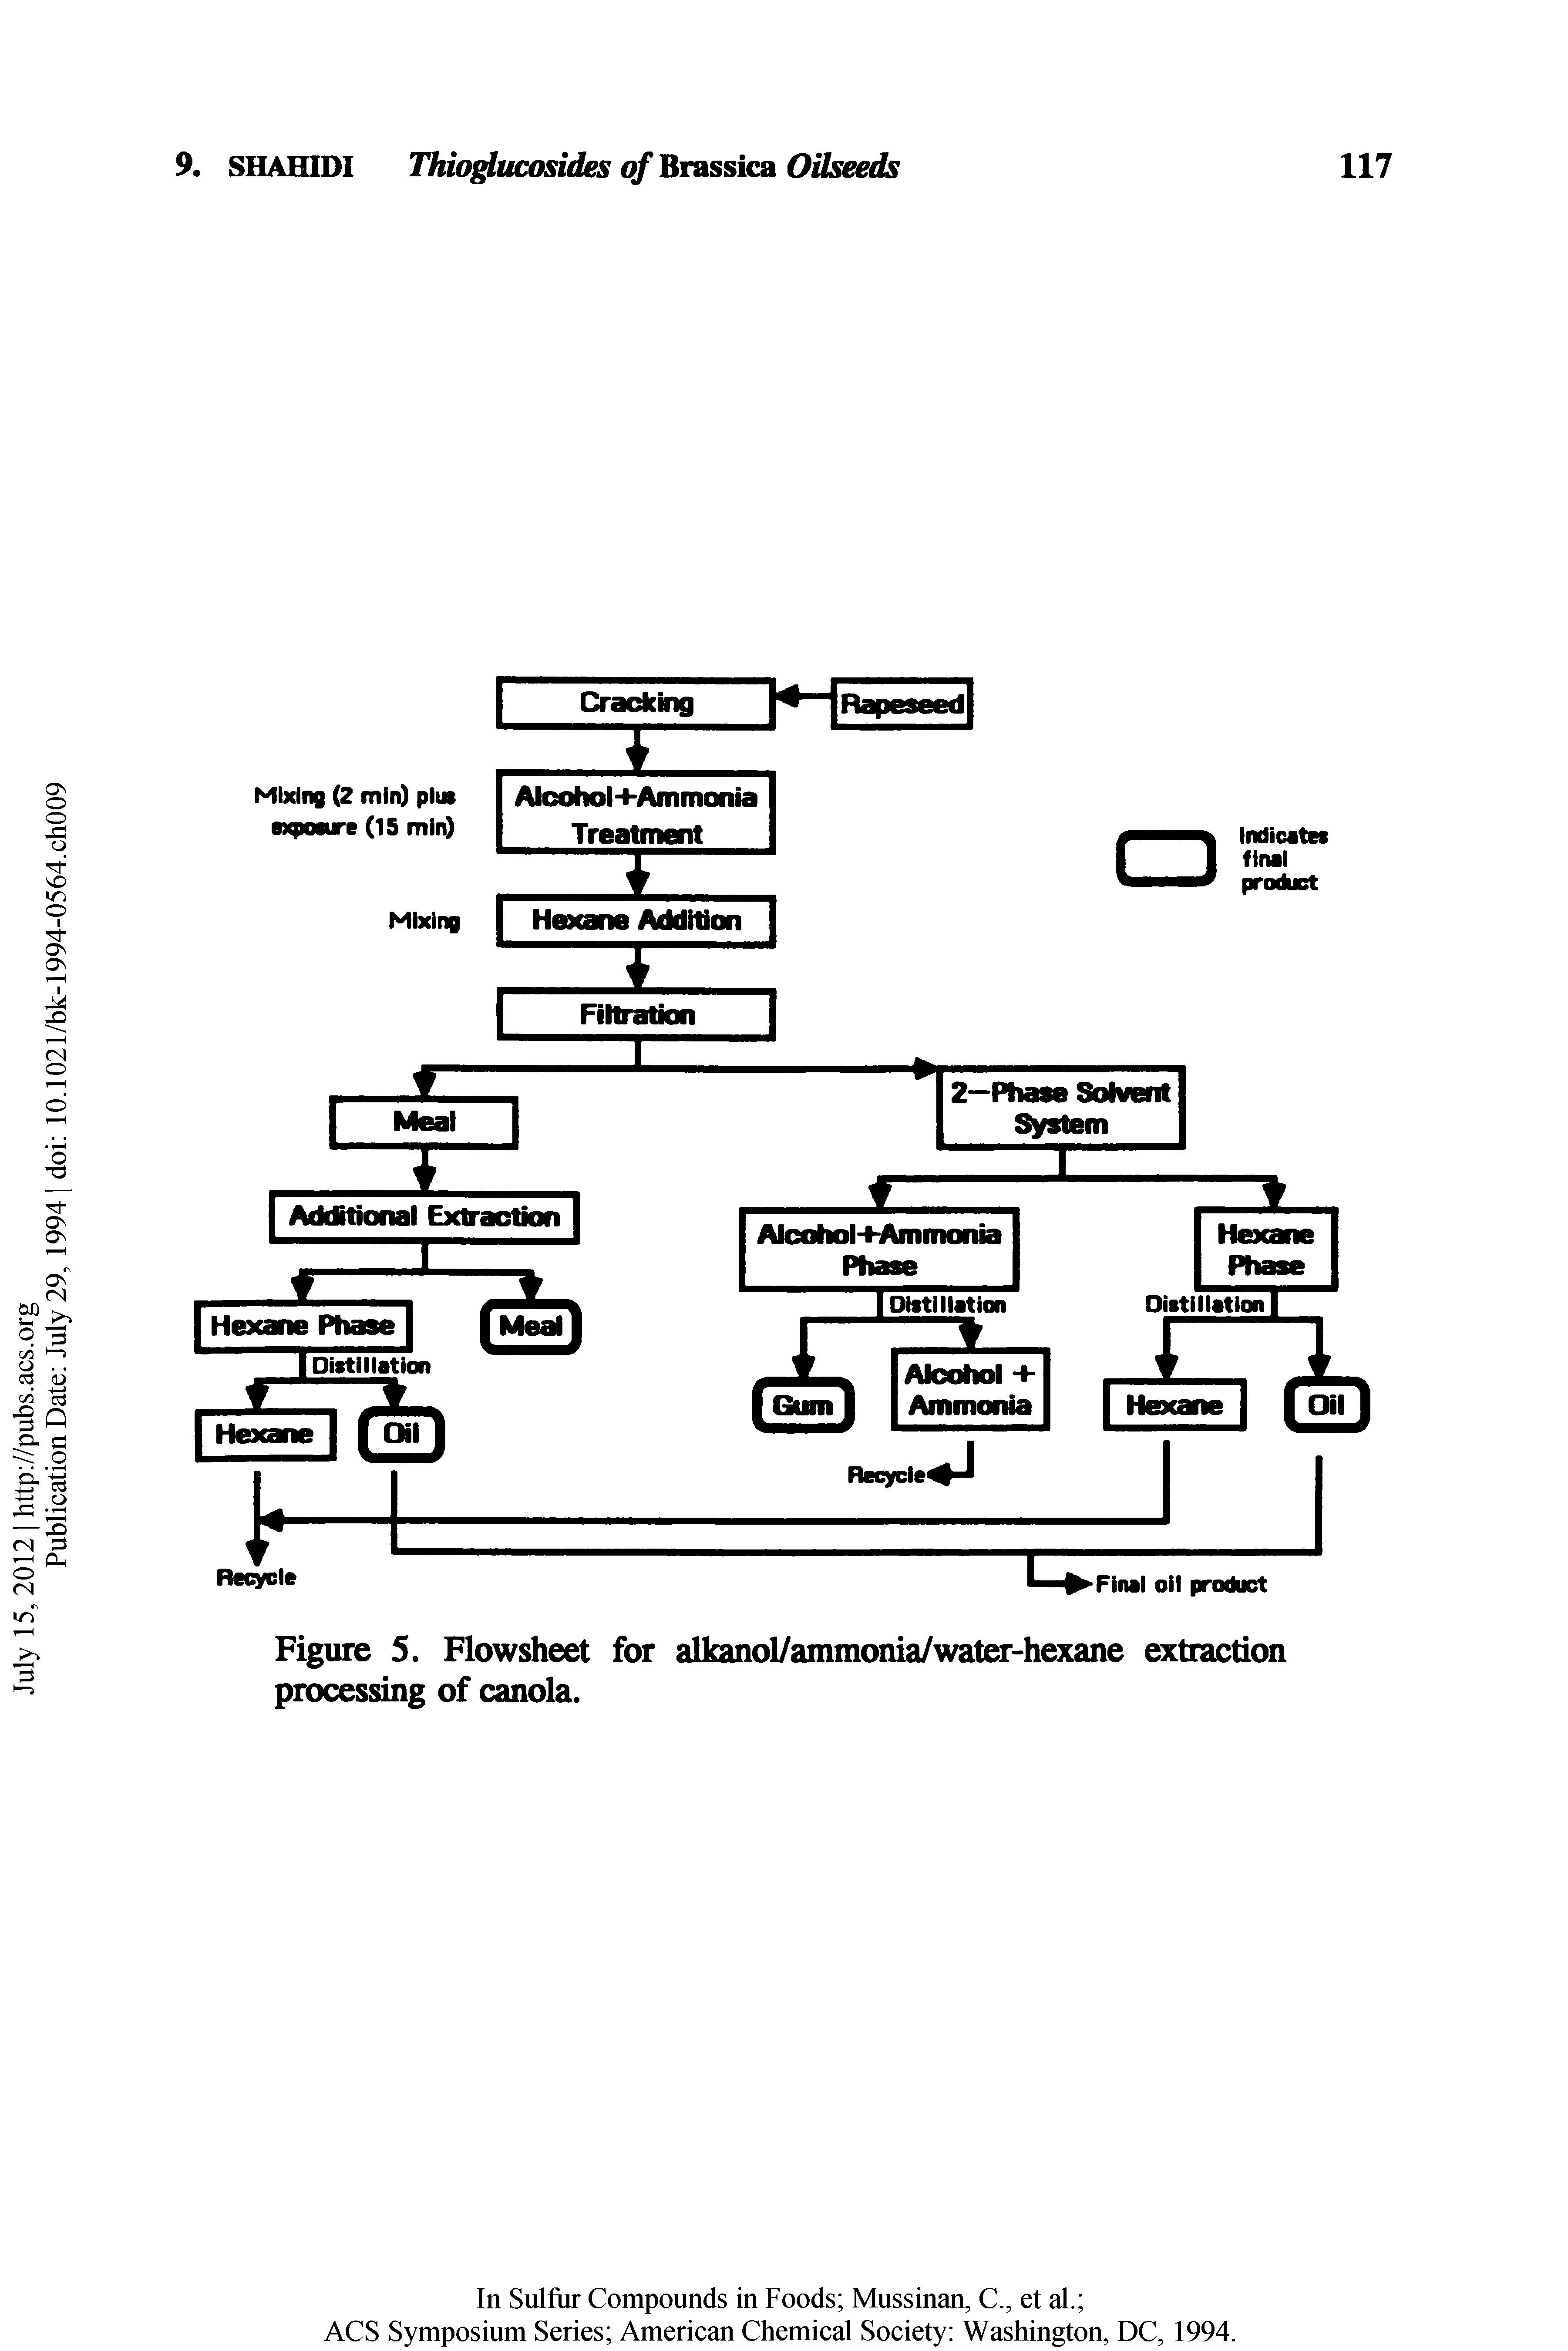 Figure S. Flowsheet for alkanol/ammonia/water-hexane extraction processing of canola.